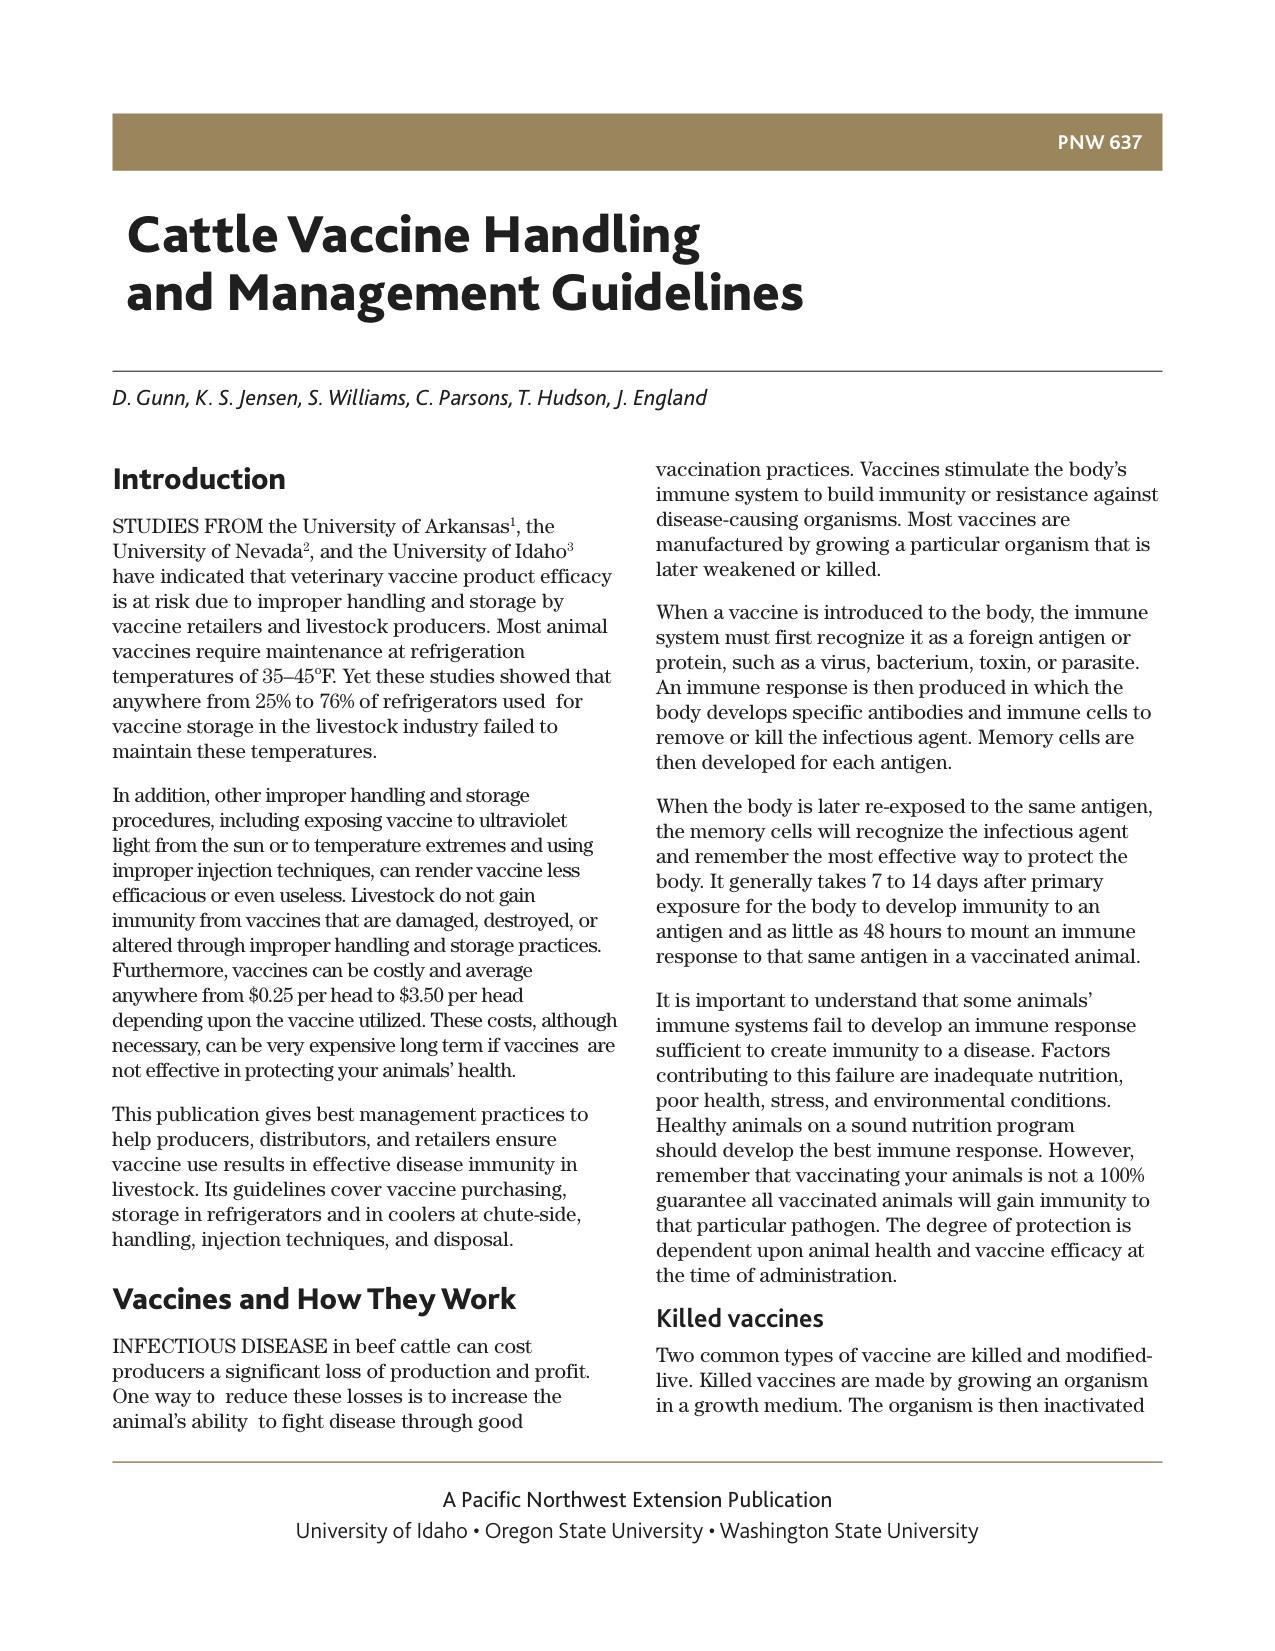 Image of Cattle Vaccine Handling and Management Guidelines publication